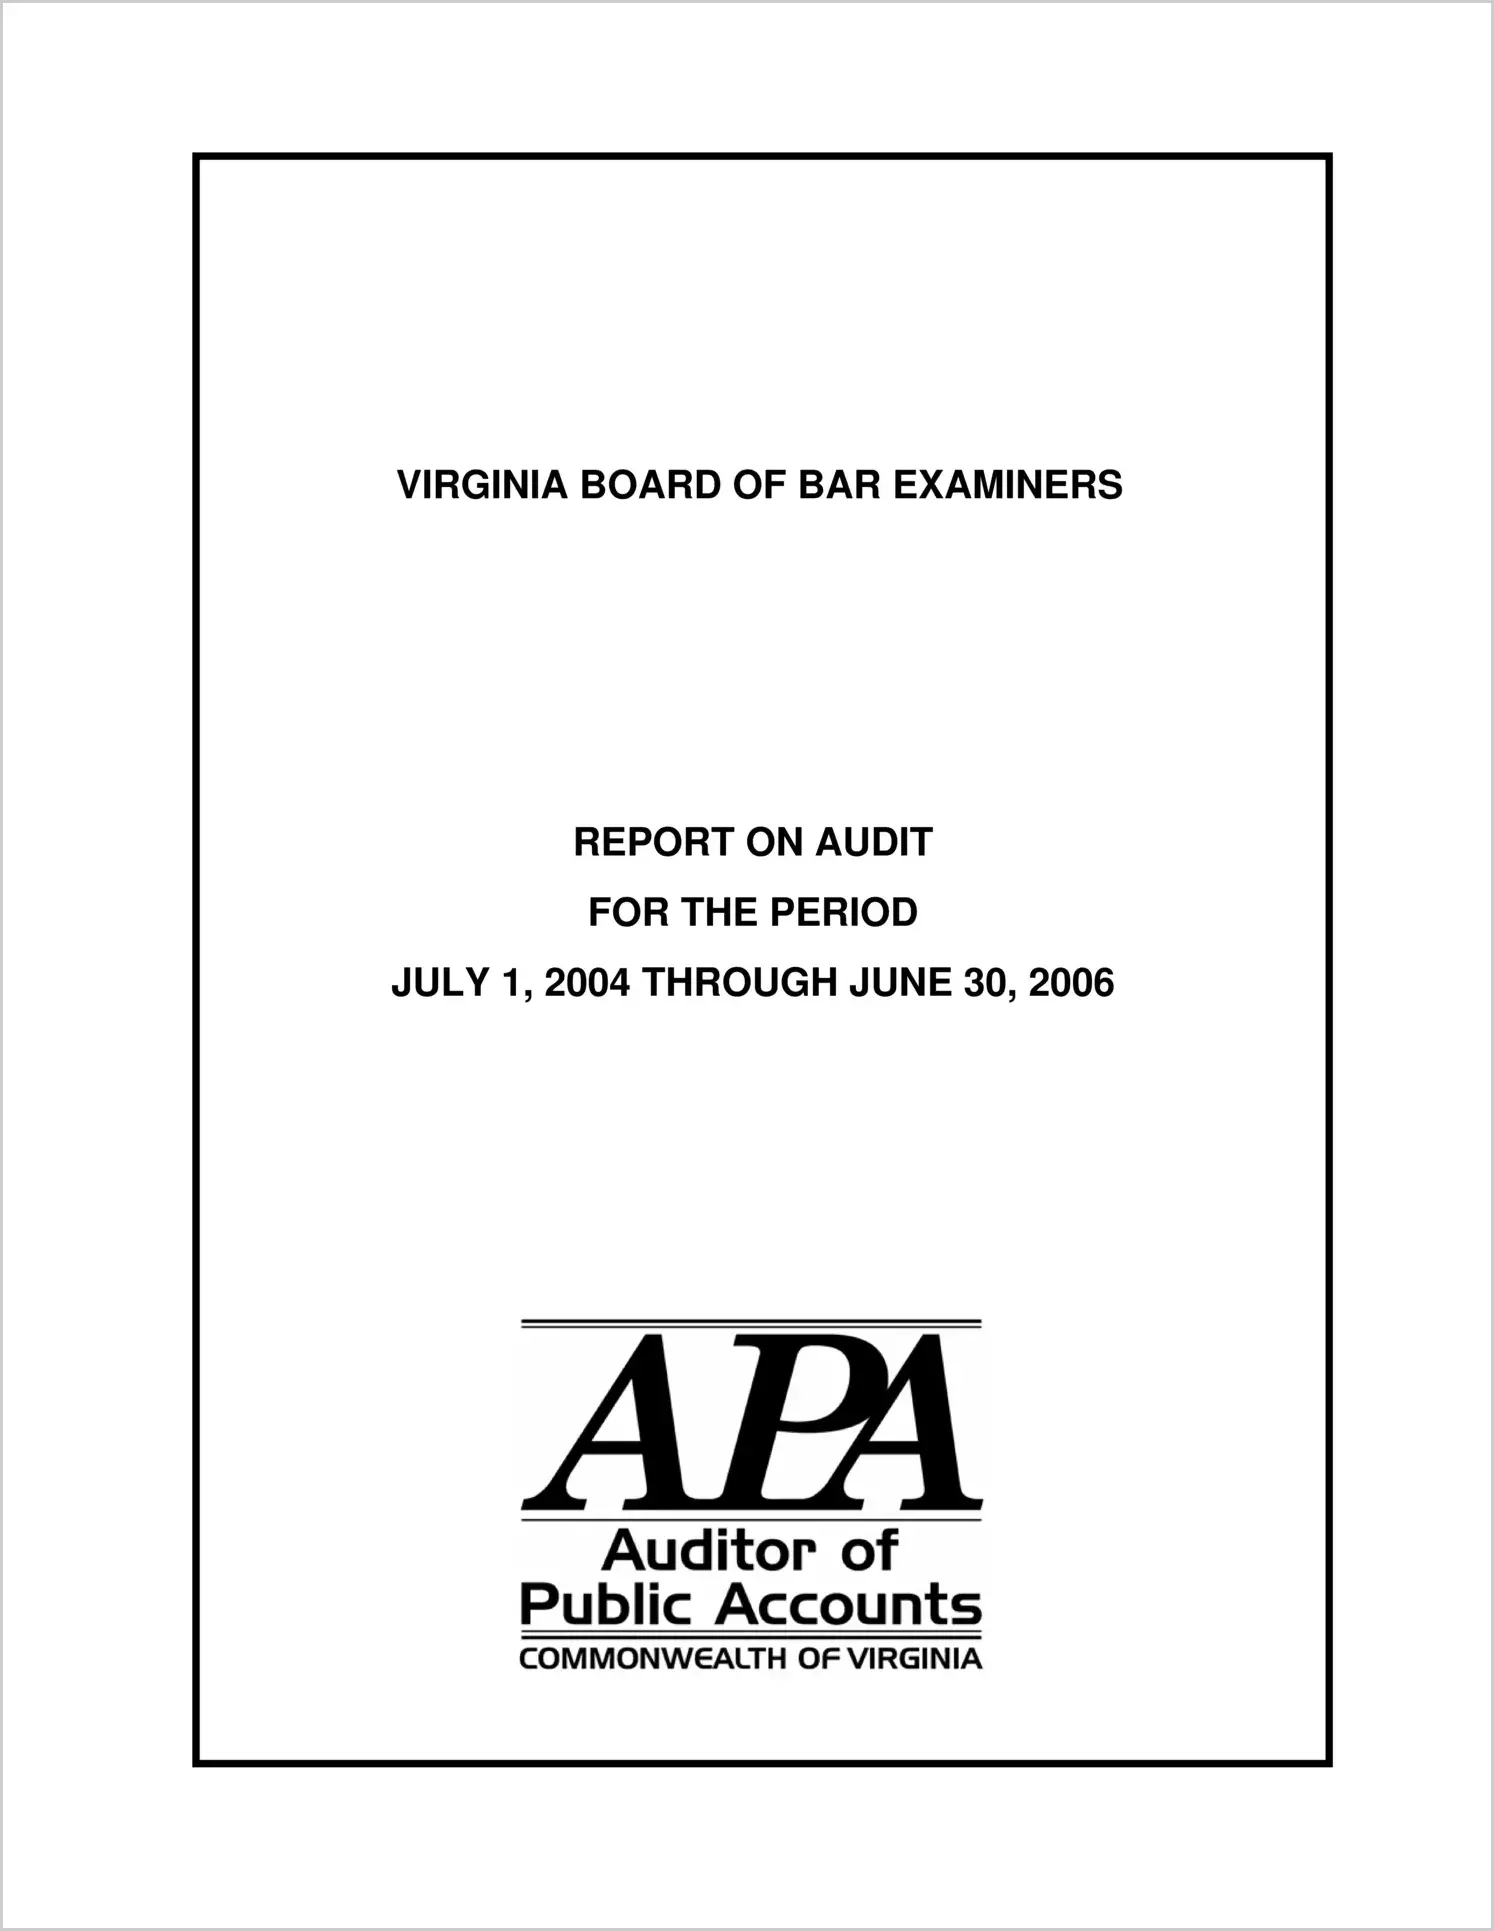 State Board of Bar Examiners for the period July 1, 2004 to June 30, 2006